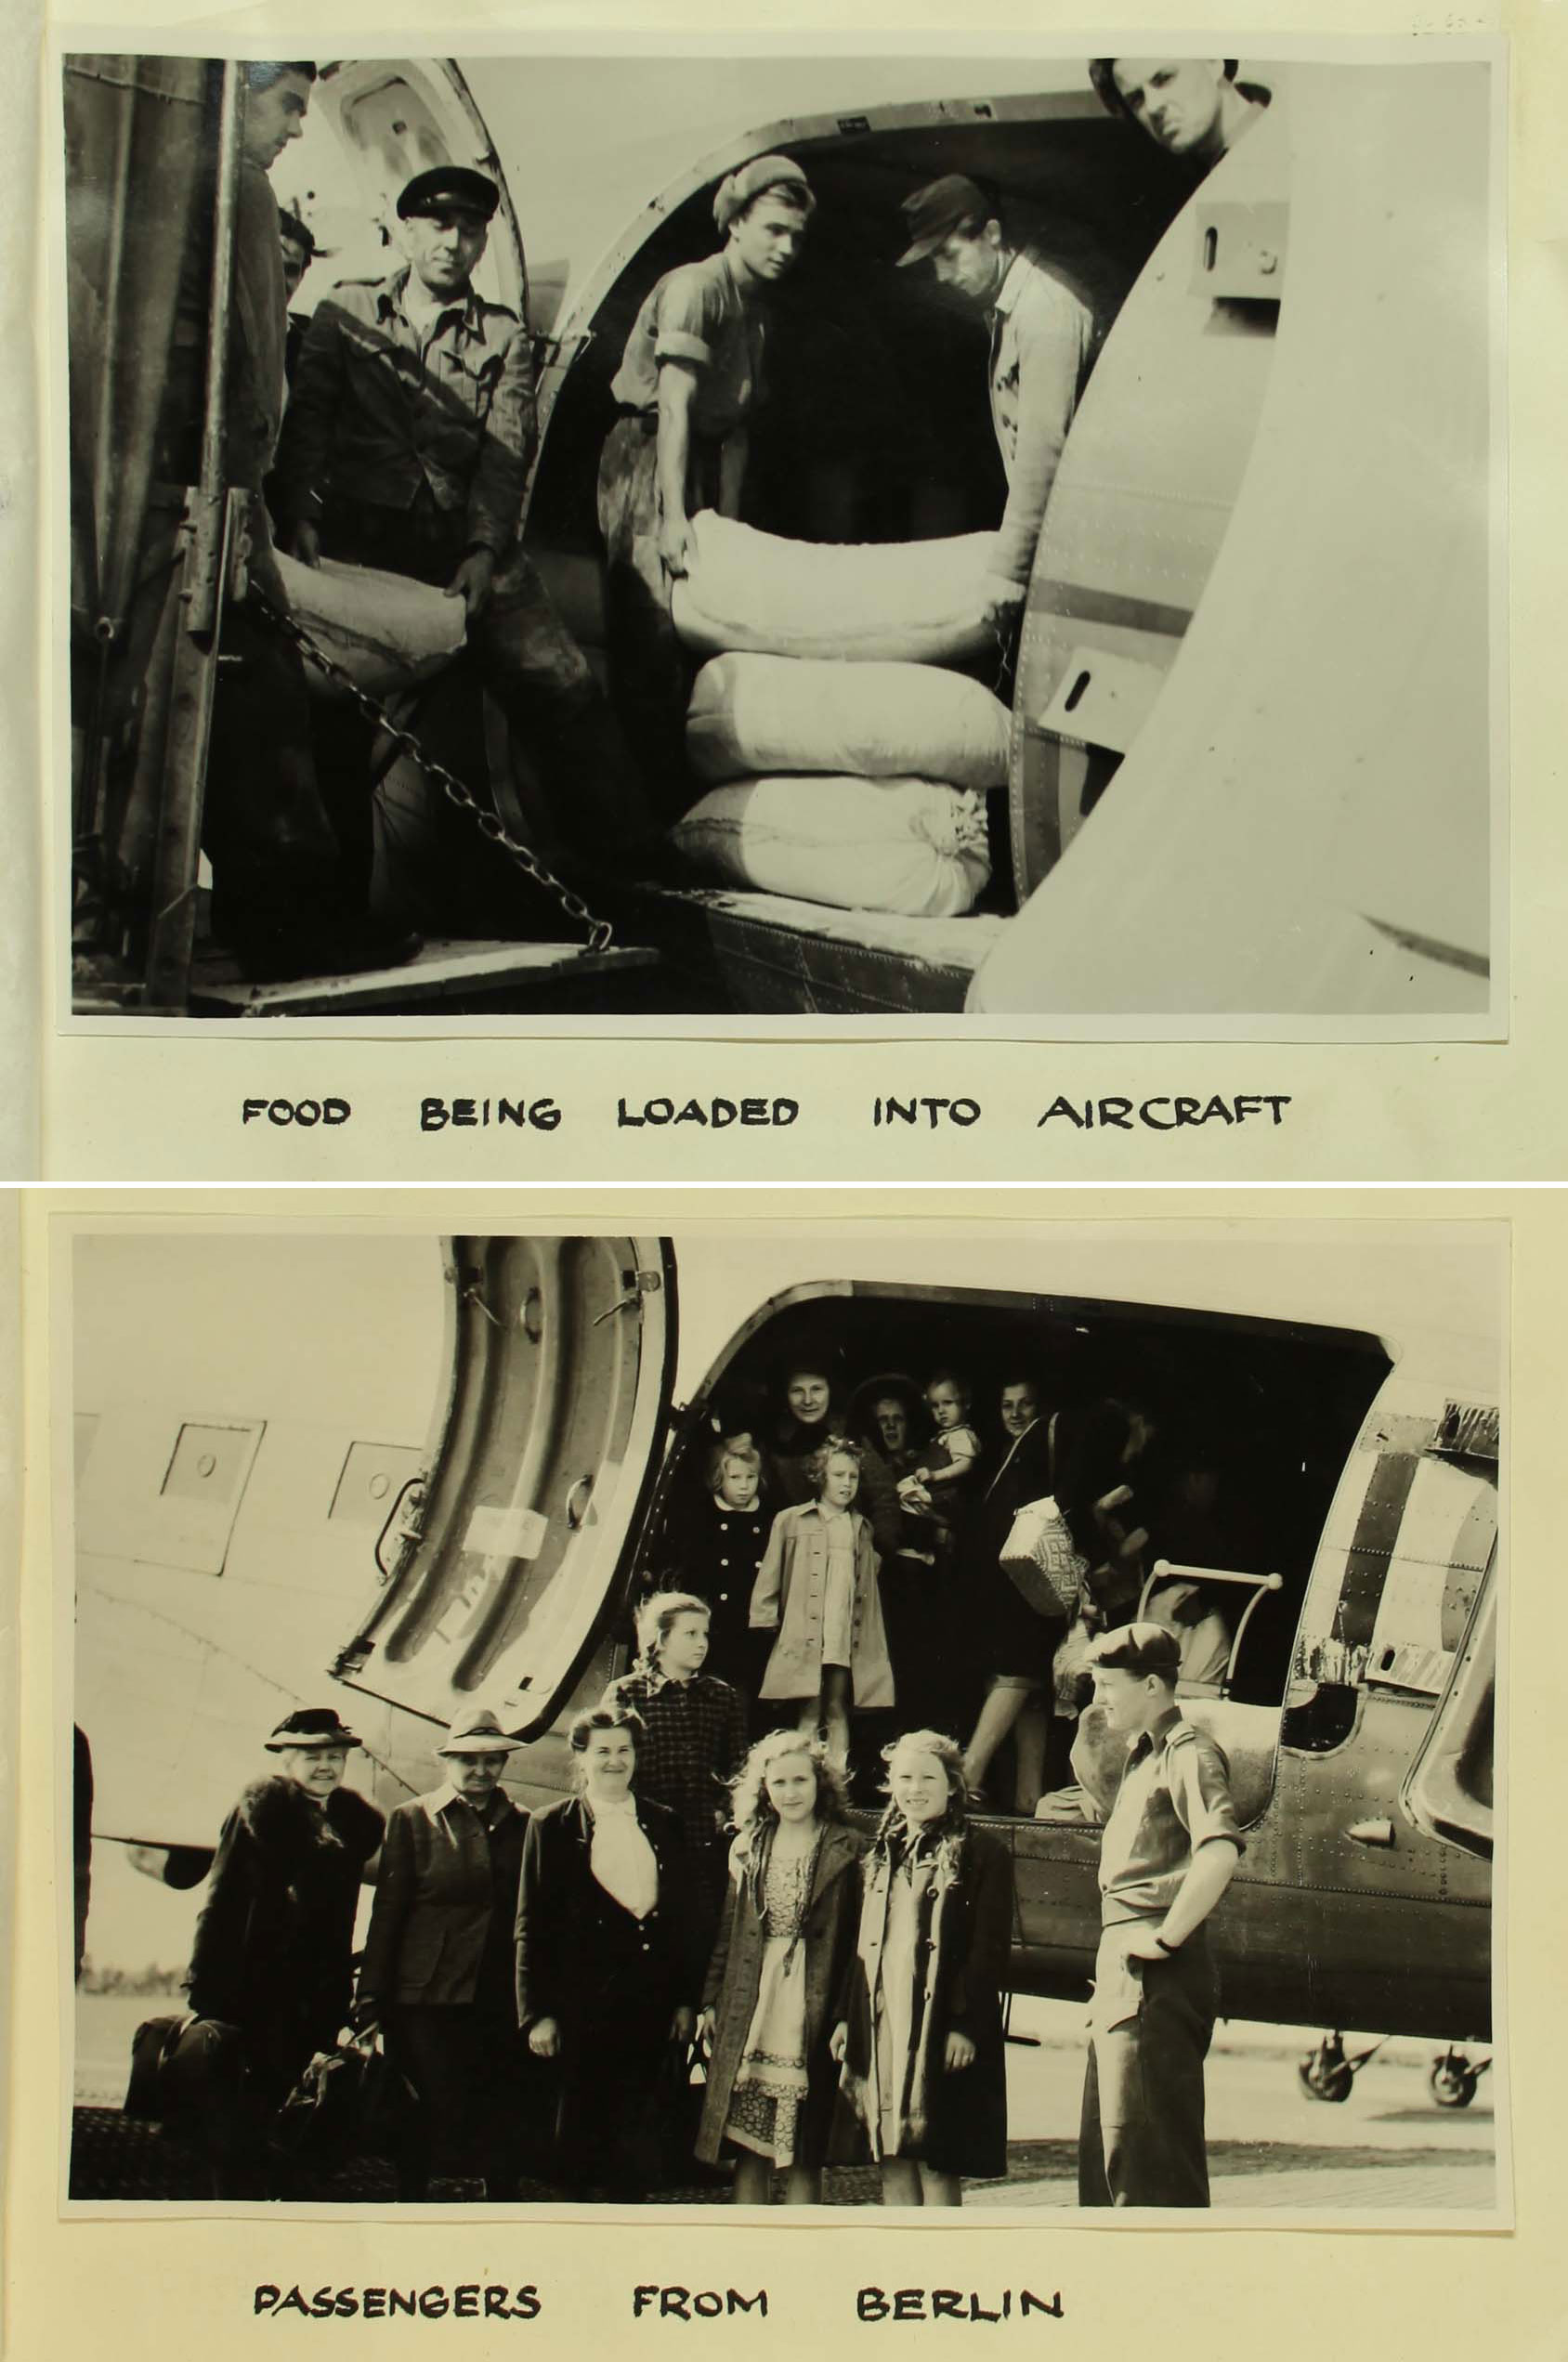 Top photo shots men lifting heavy sacks into an aircraft. Bottom photo shows a group of people of mixed ages smiling for the camera in front of an open aircraft.